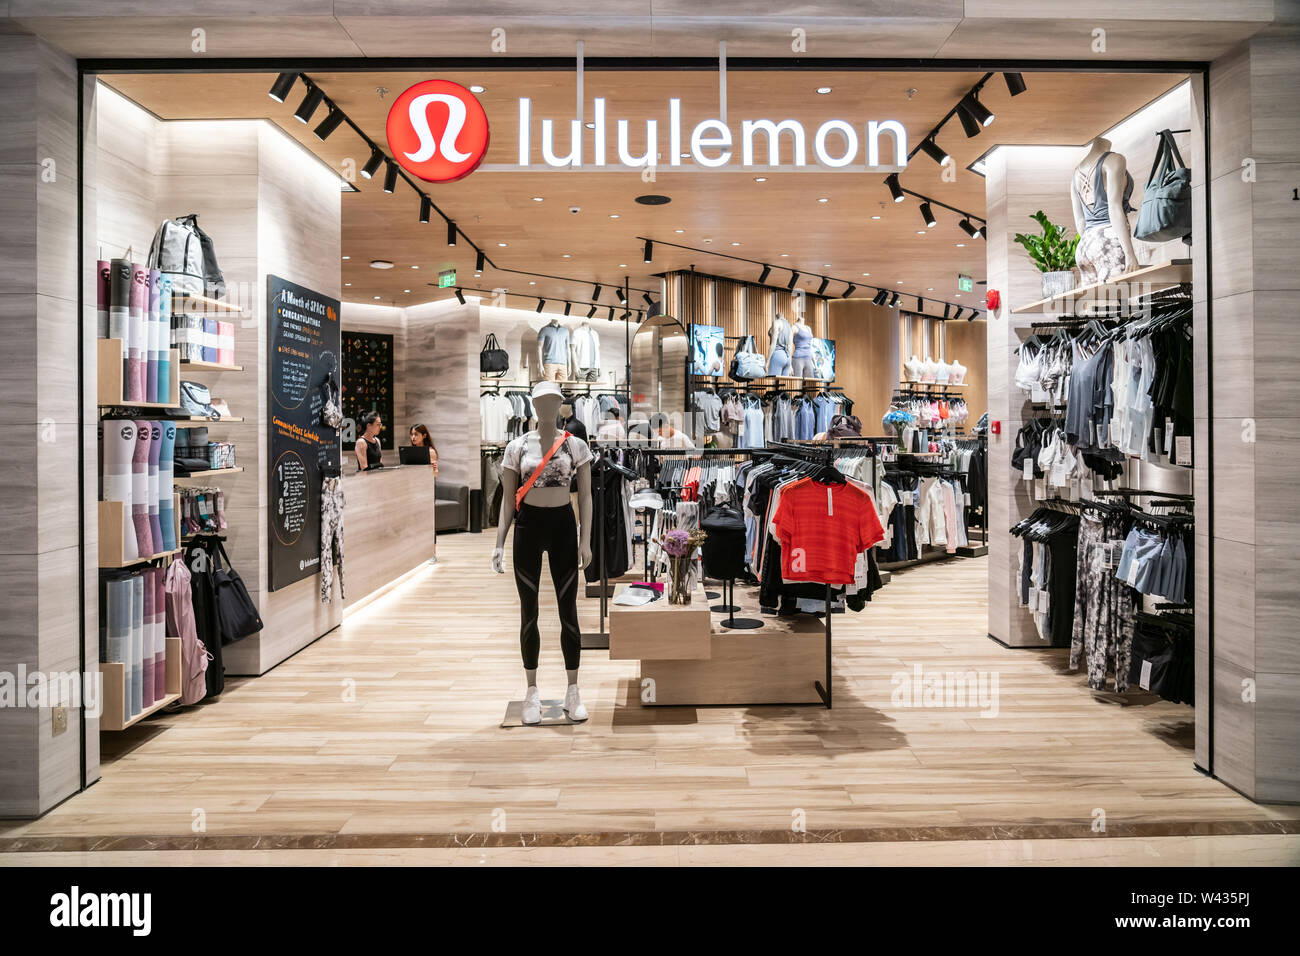 Canadian athletic apparel retailer Lululemon store and logo seen